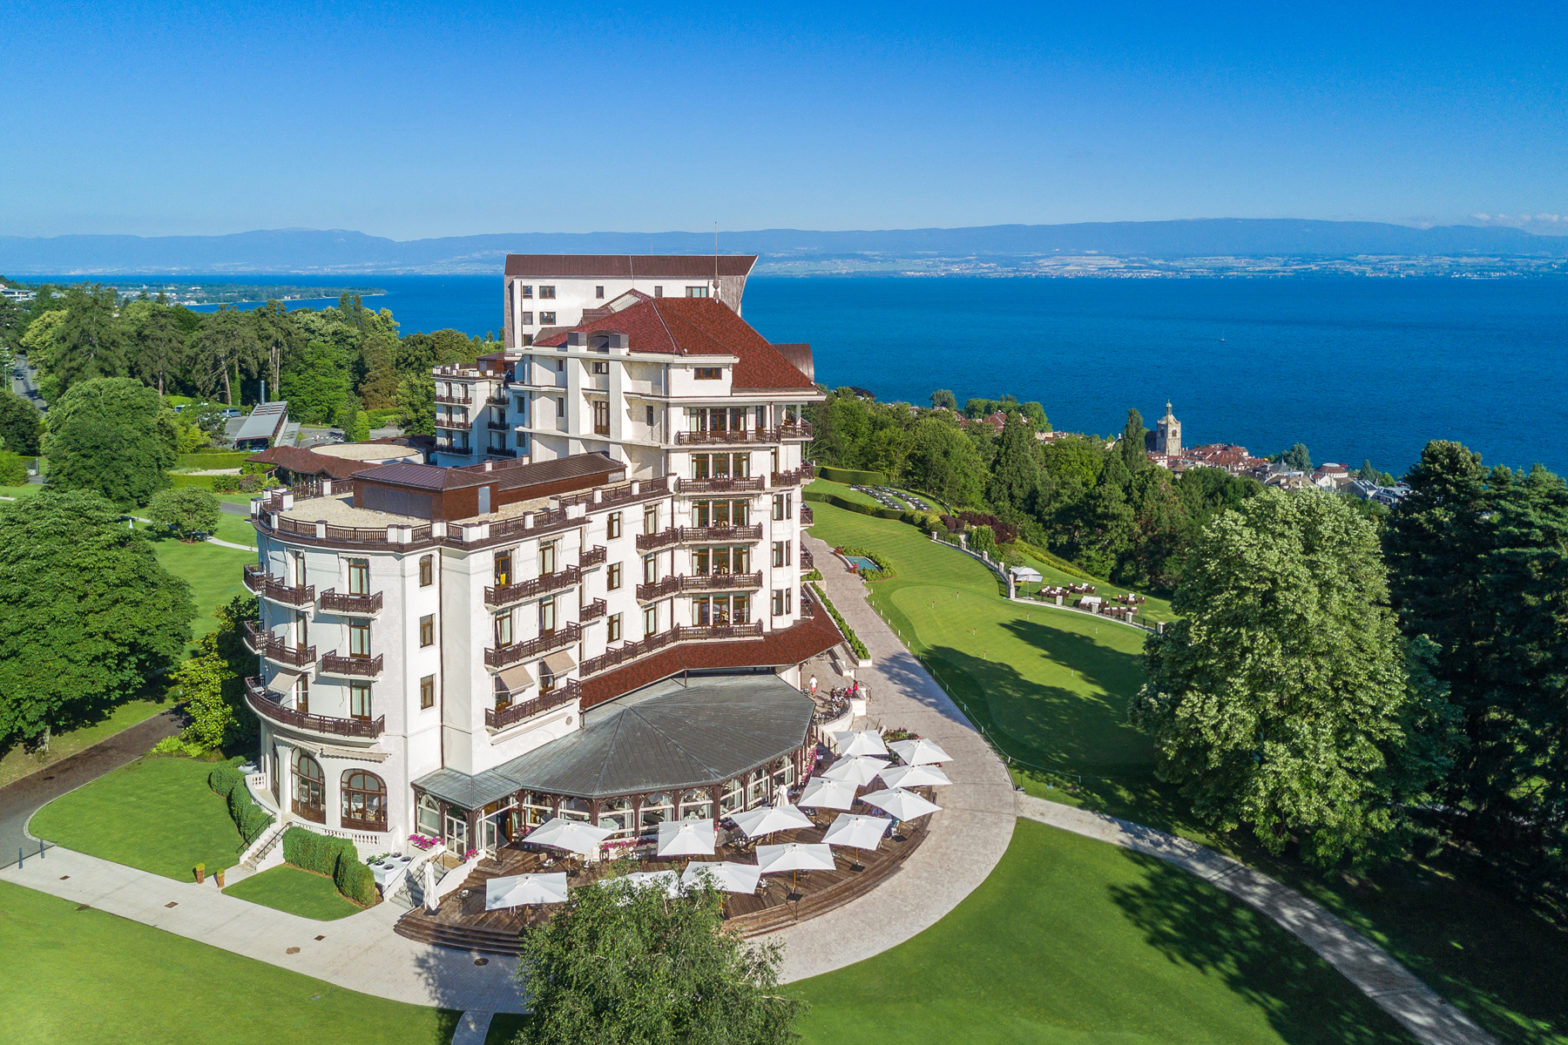 HOTEL ERMITAGE EVIAN RESORT - Play Golf in France